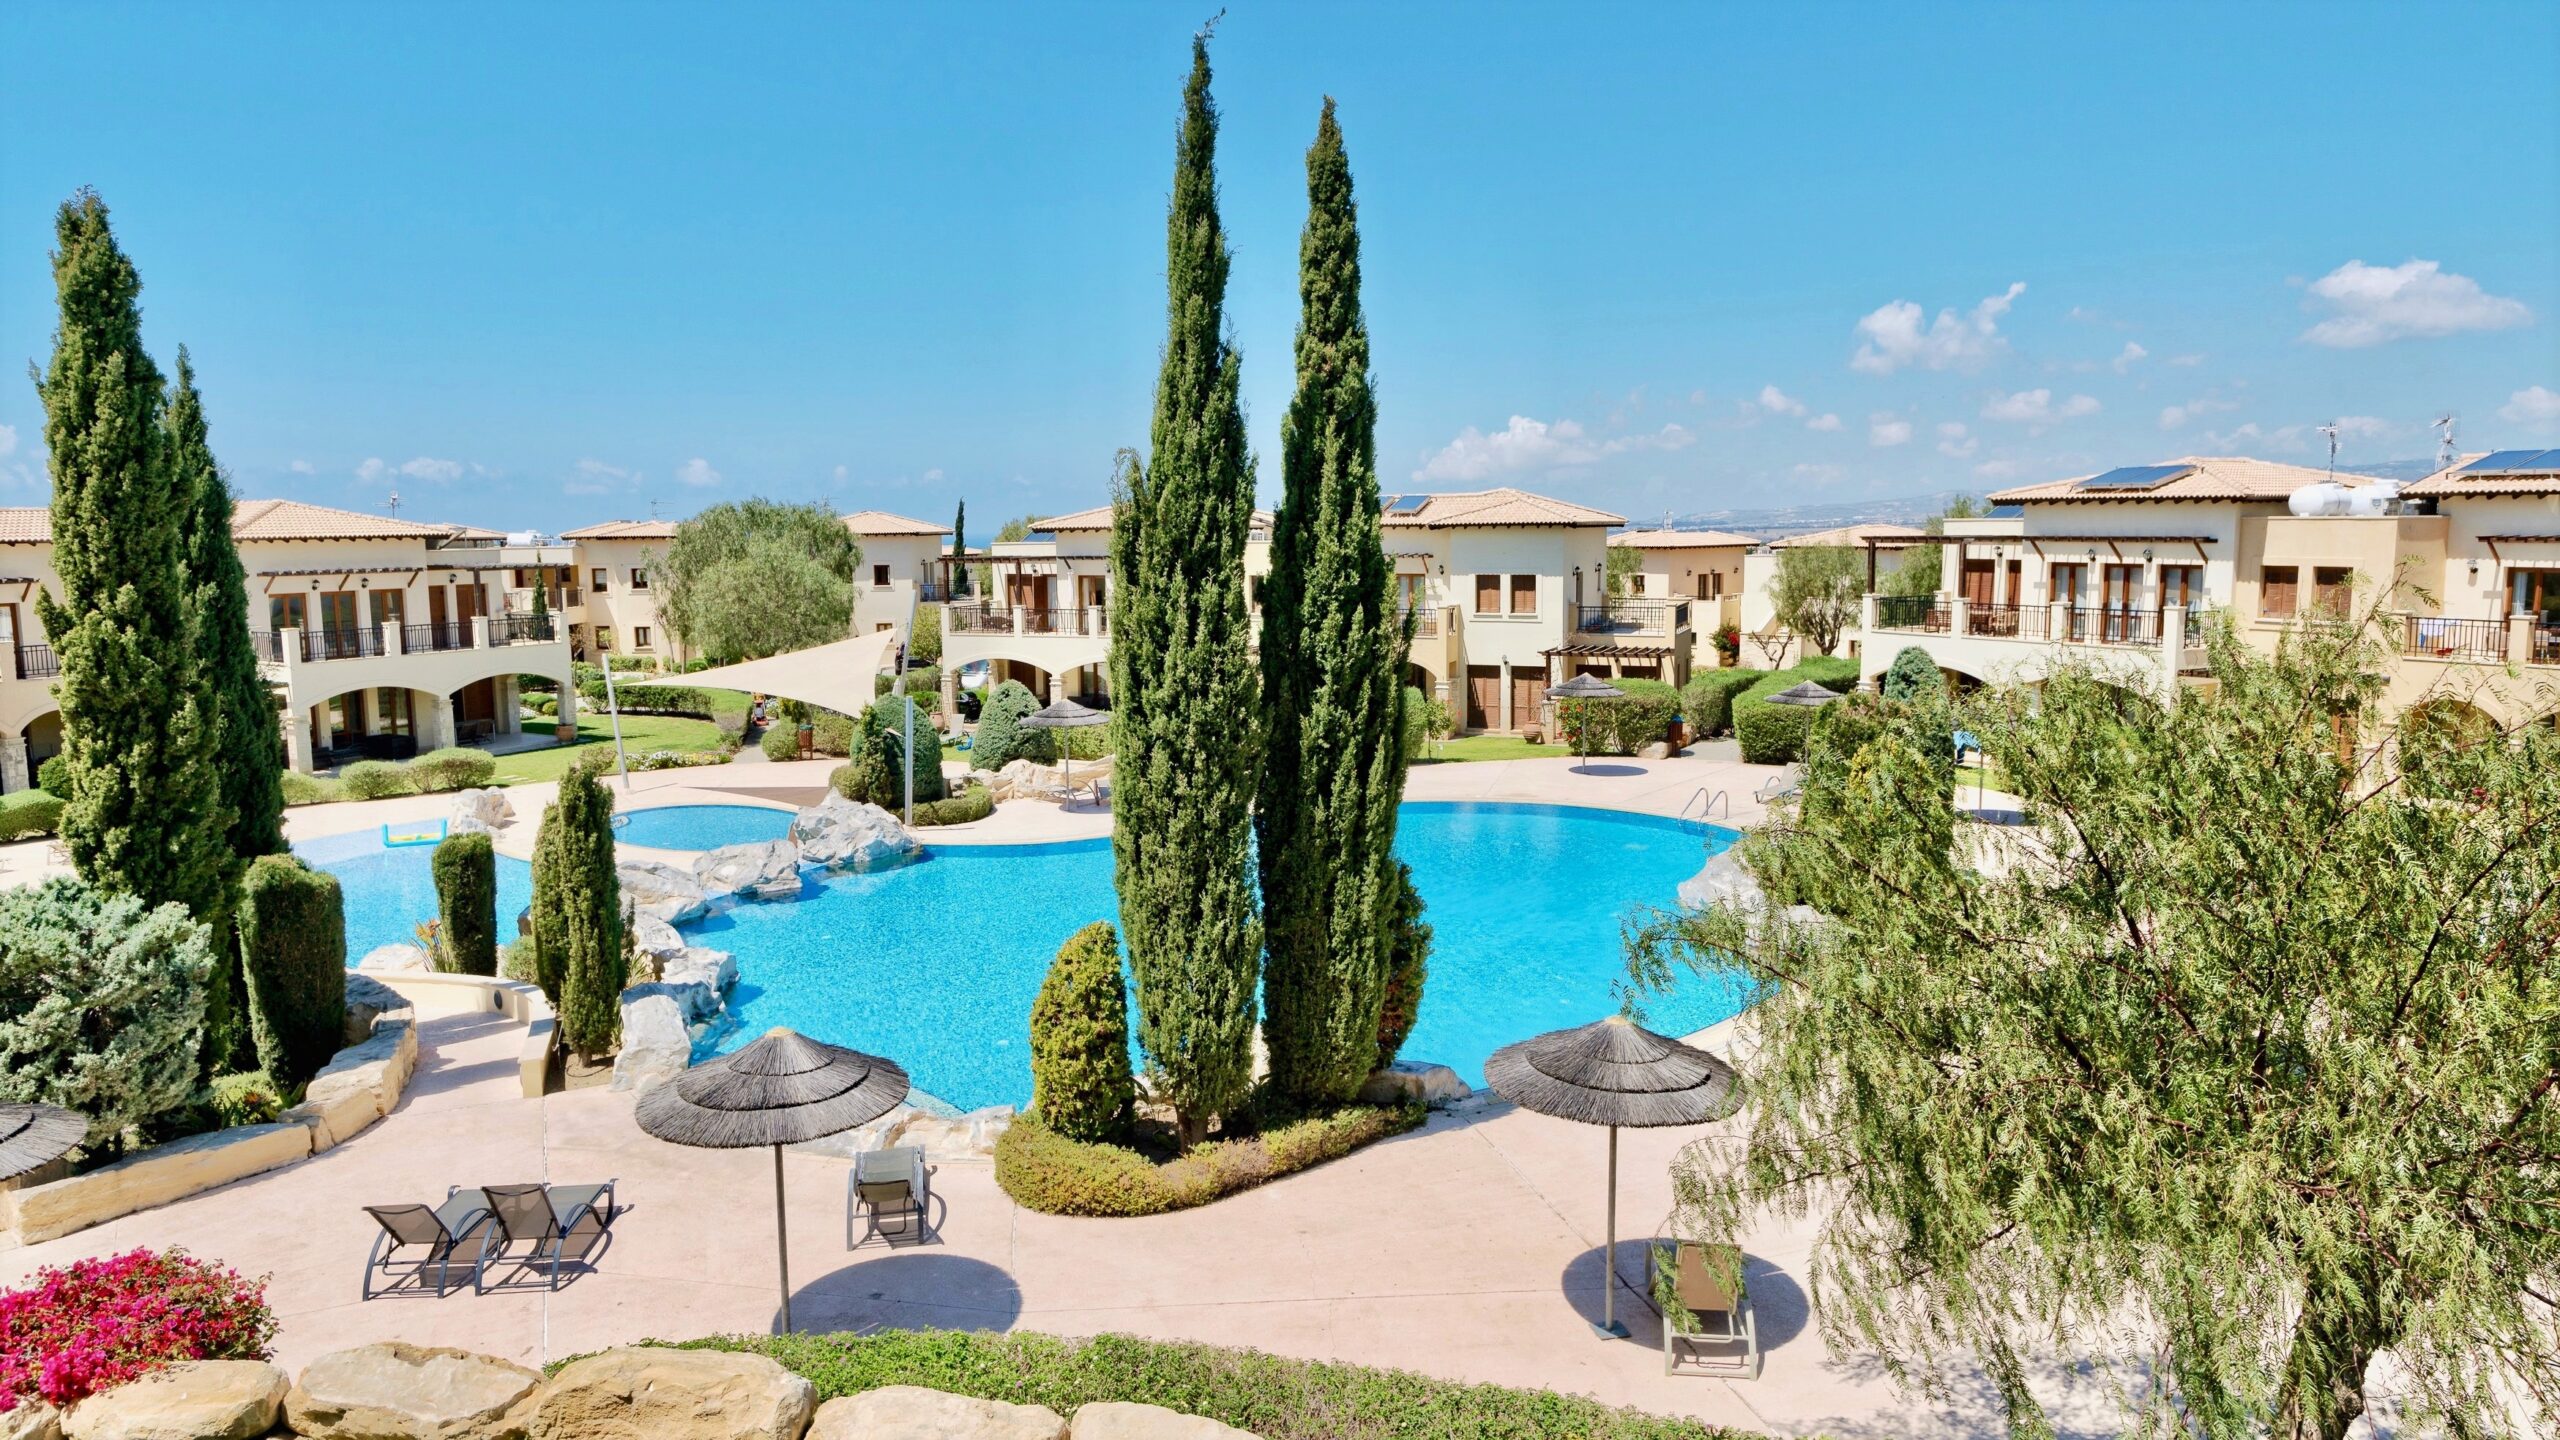 Aerial view of Theseus village and communal pools, and surrounding apartment blocks. Aphrodite Hills Resort, Cyprus.